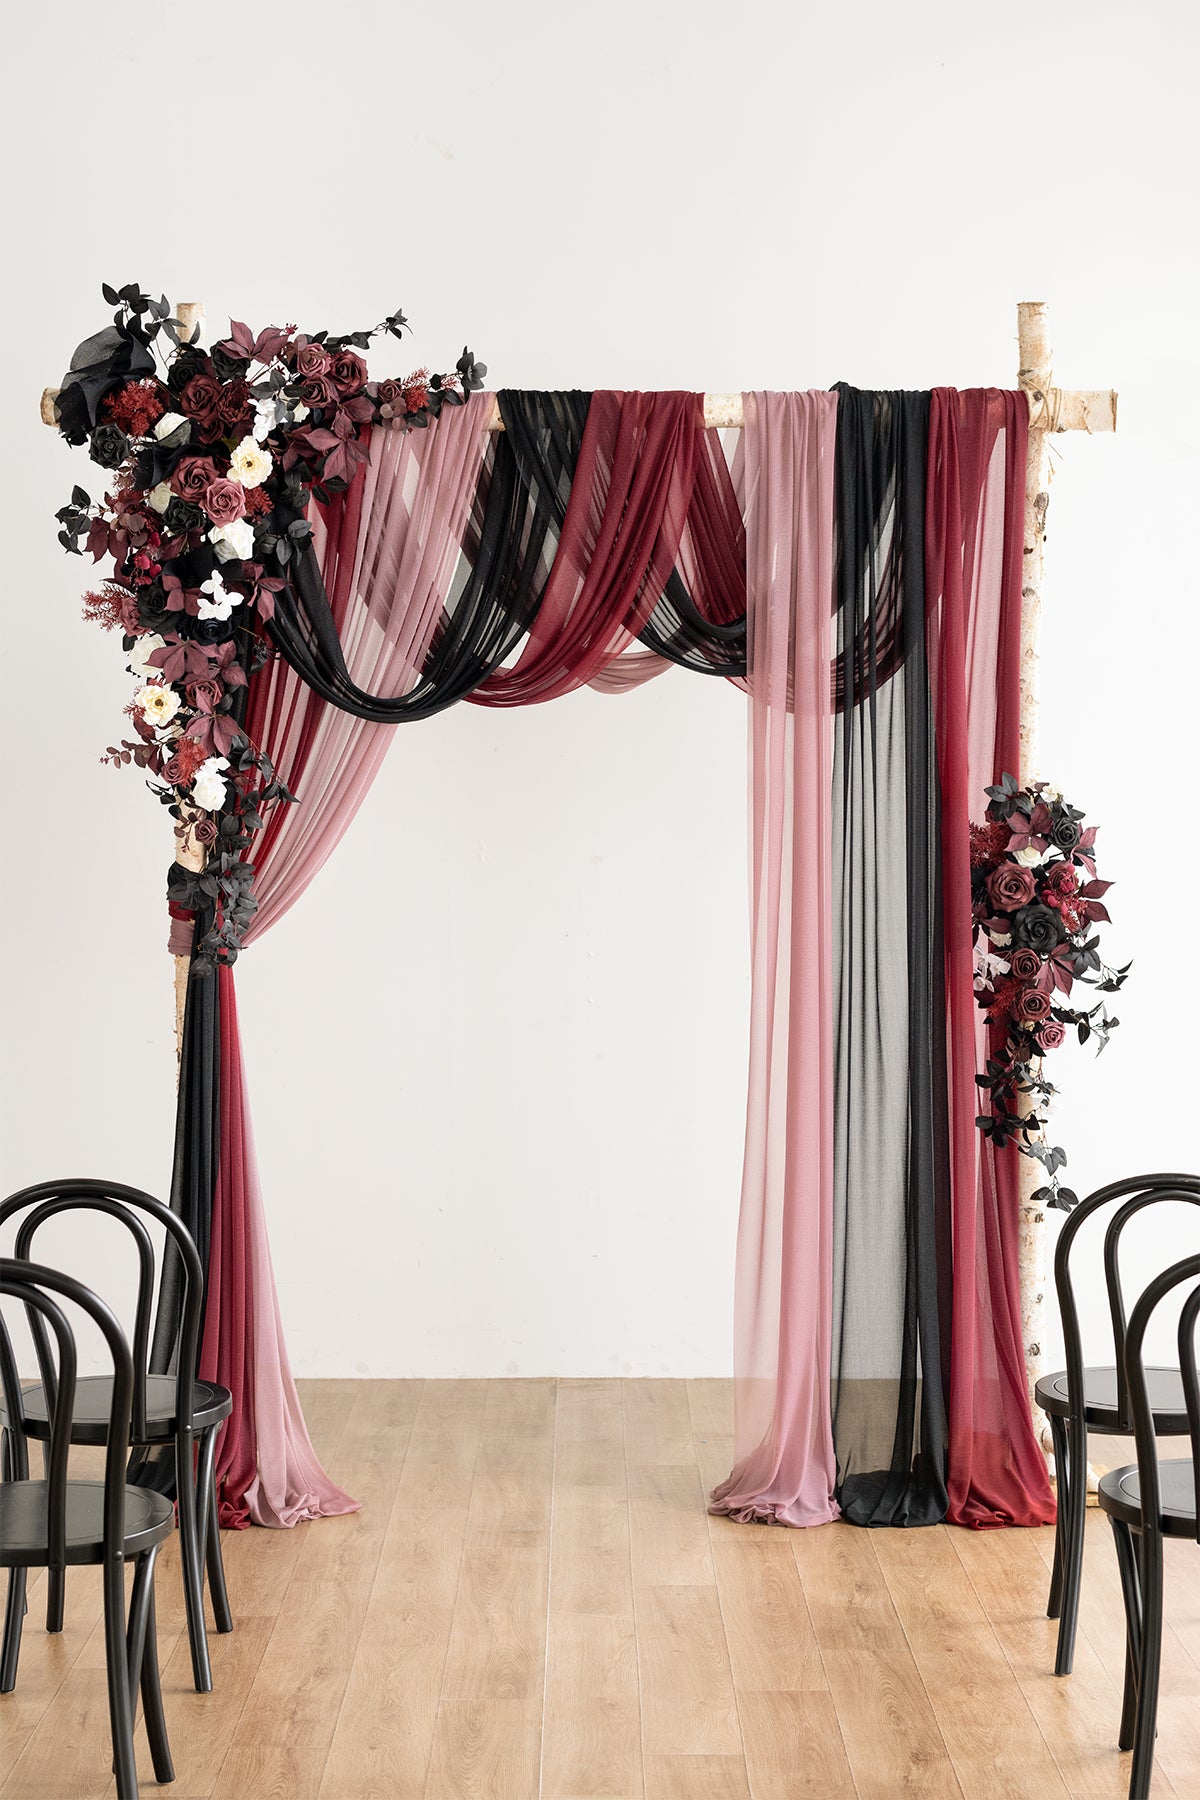 Flower Arch Decor with Drapes in Moody Burgundy & Black